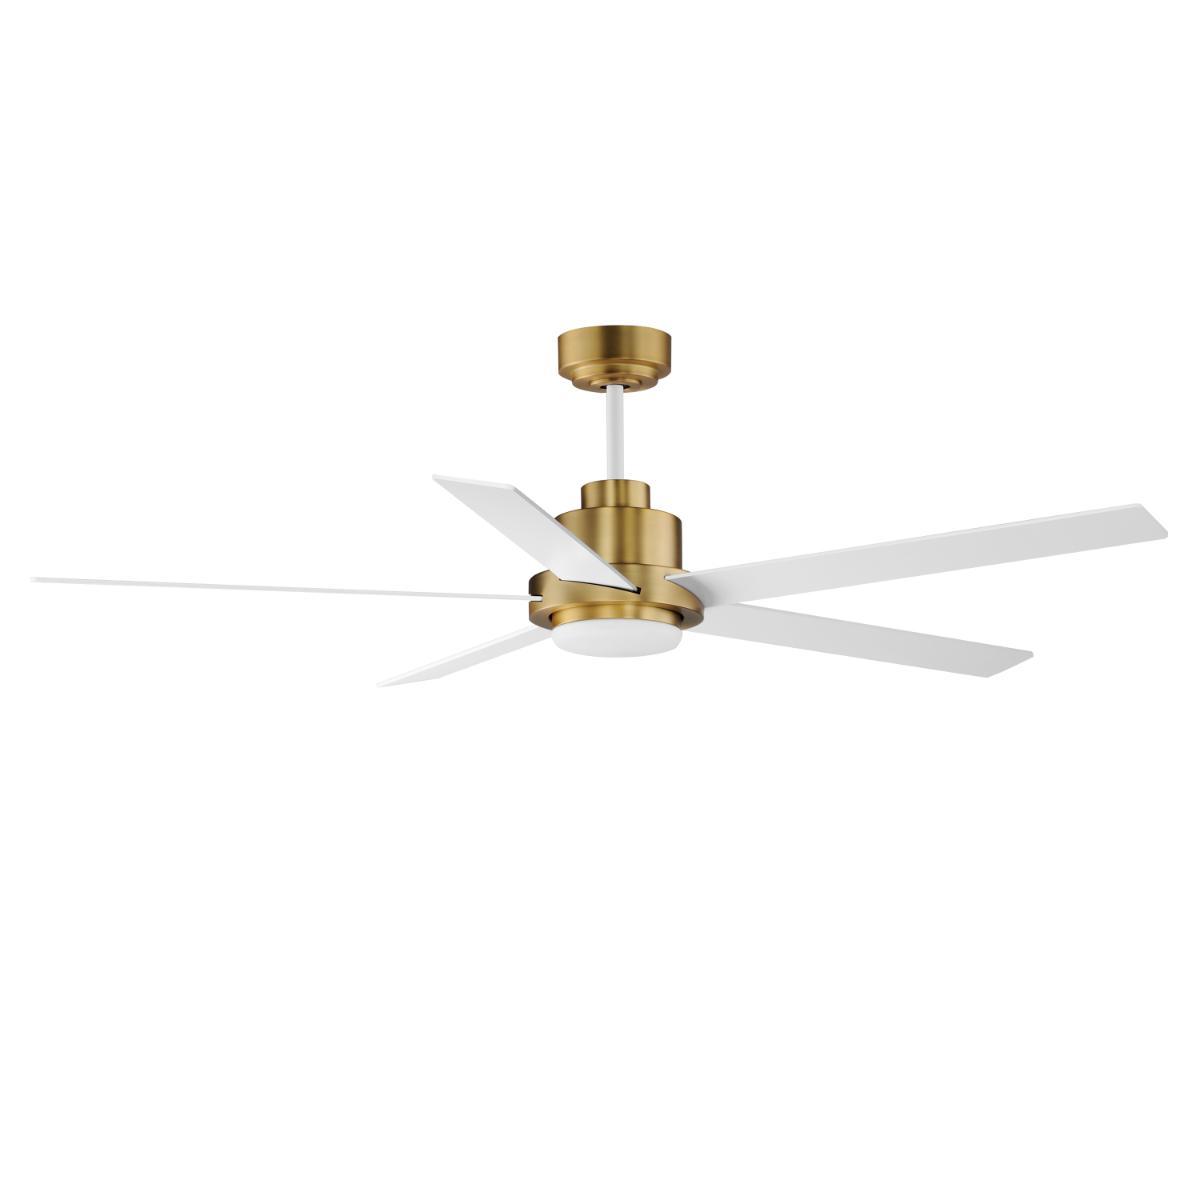 Daisy 60 Inch 5-Blade Ceiling Fan With Light and Wall Control, White,Natural Aged Brass with Matte White Blades - Bees Lighting